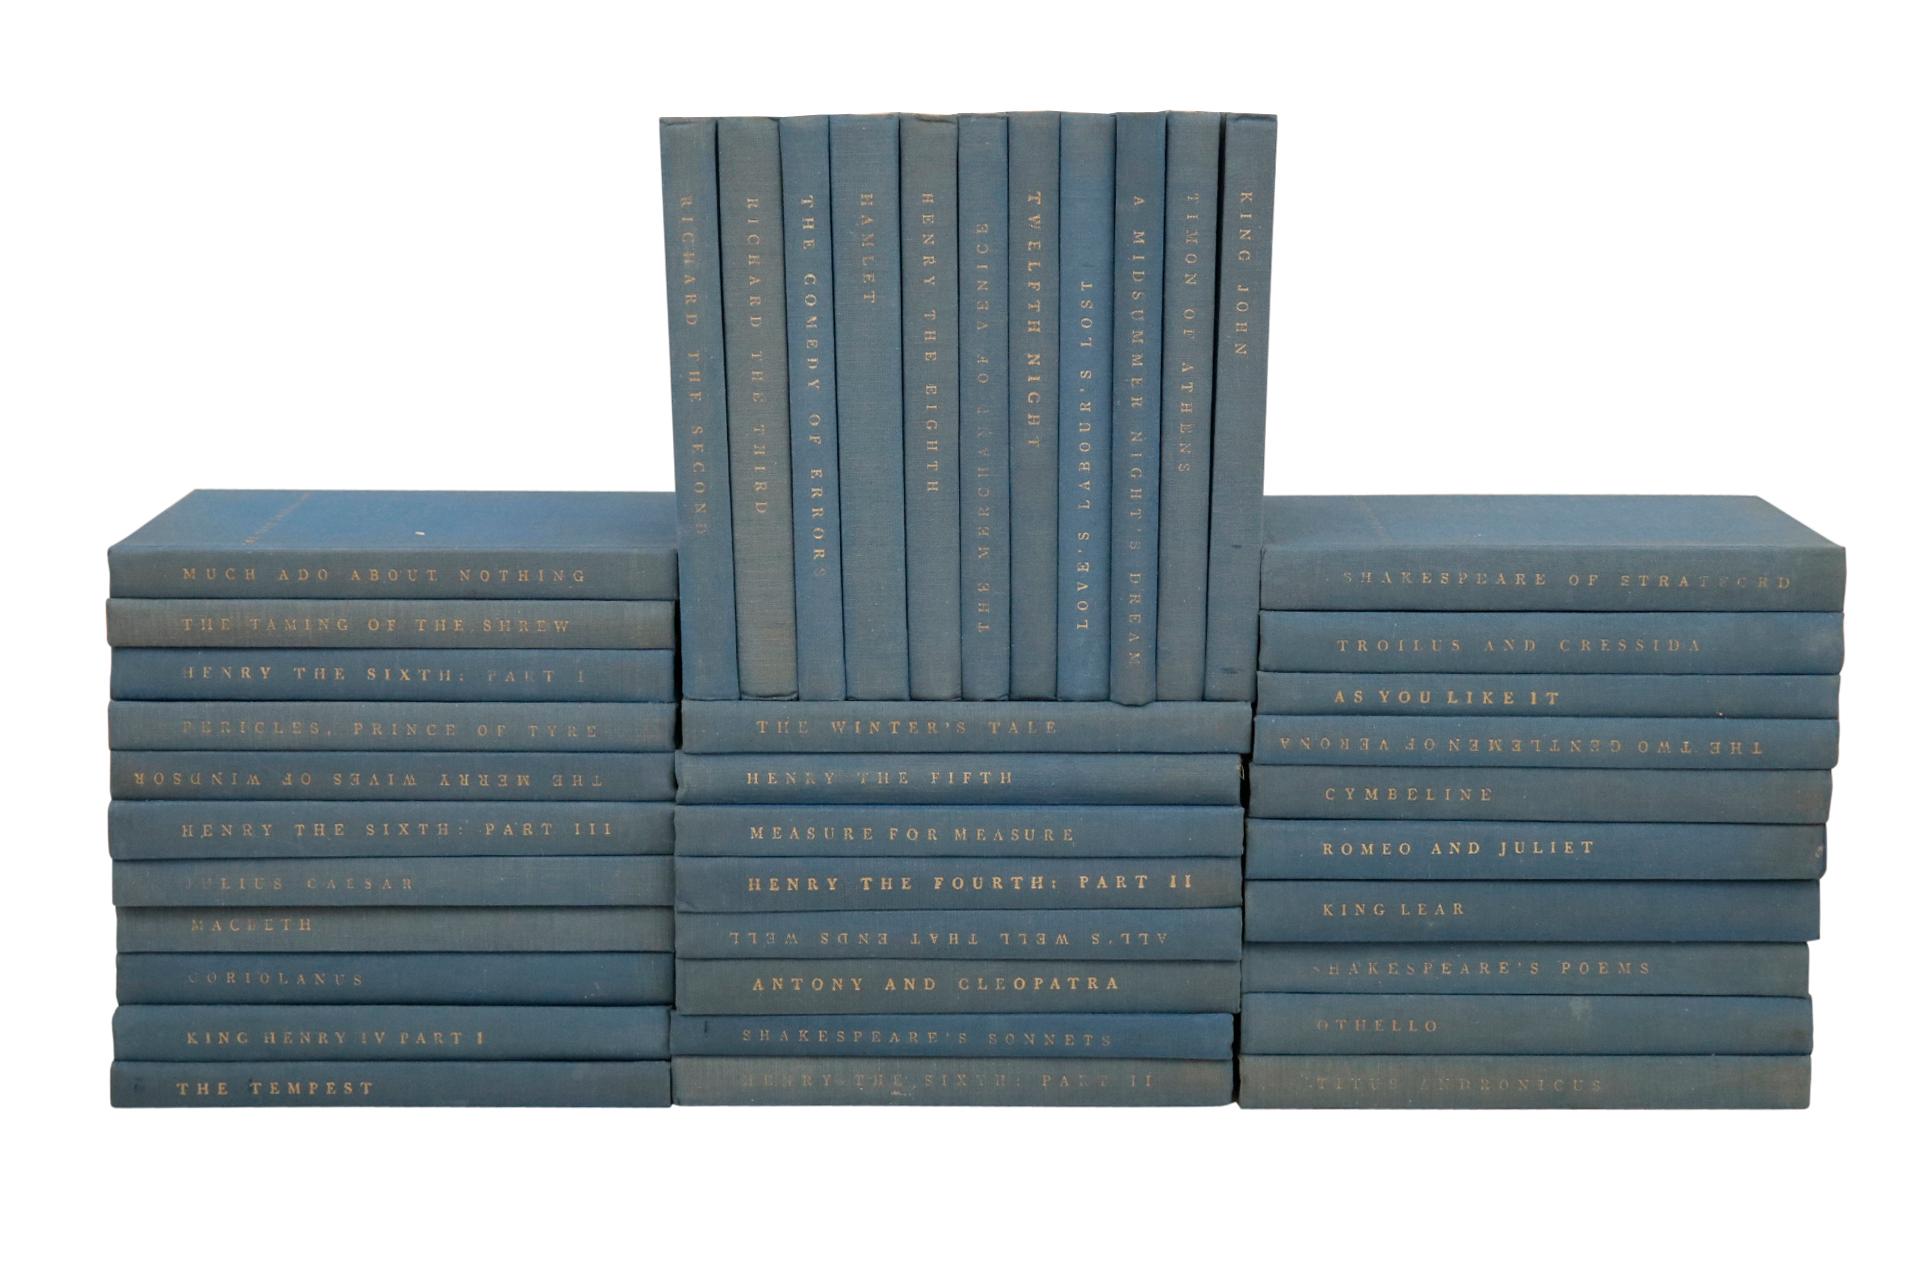 The Yale Shakespeare, complete 40 volume set. Printed in the United States of America between 1919 and 1964. Published by the Yale University Press. Hardcovers. Titles inluded are;

The Comedy of Errors
Julius Caesar
The Taming of The